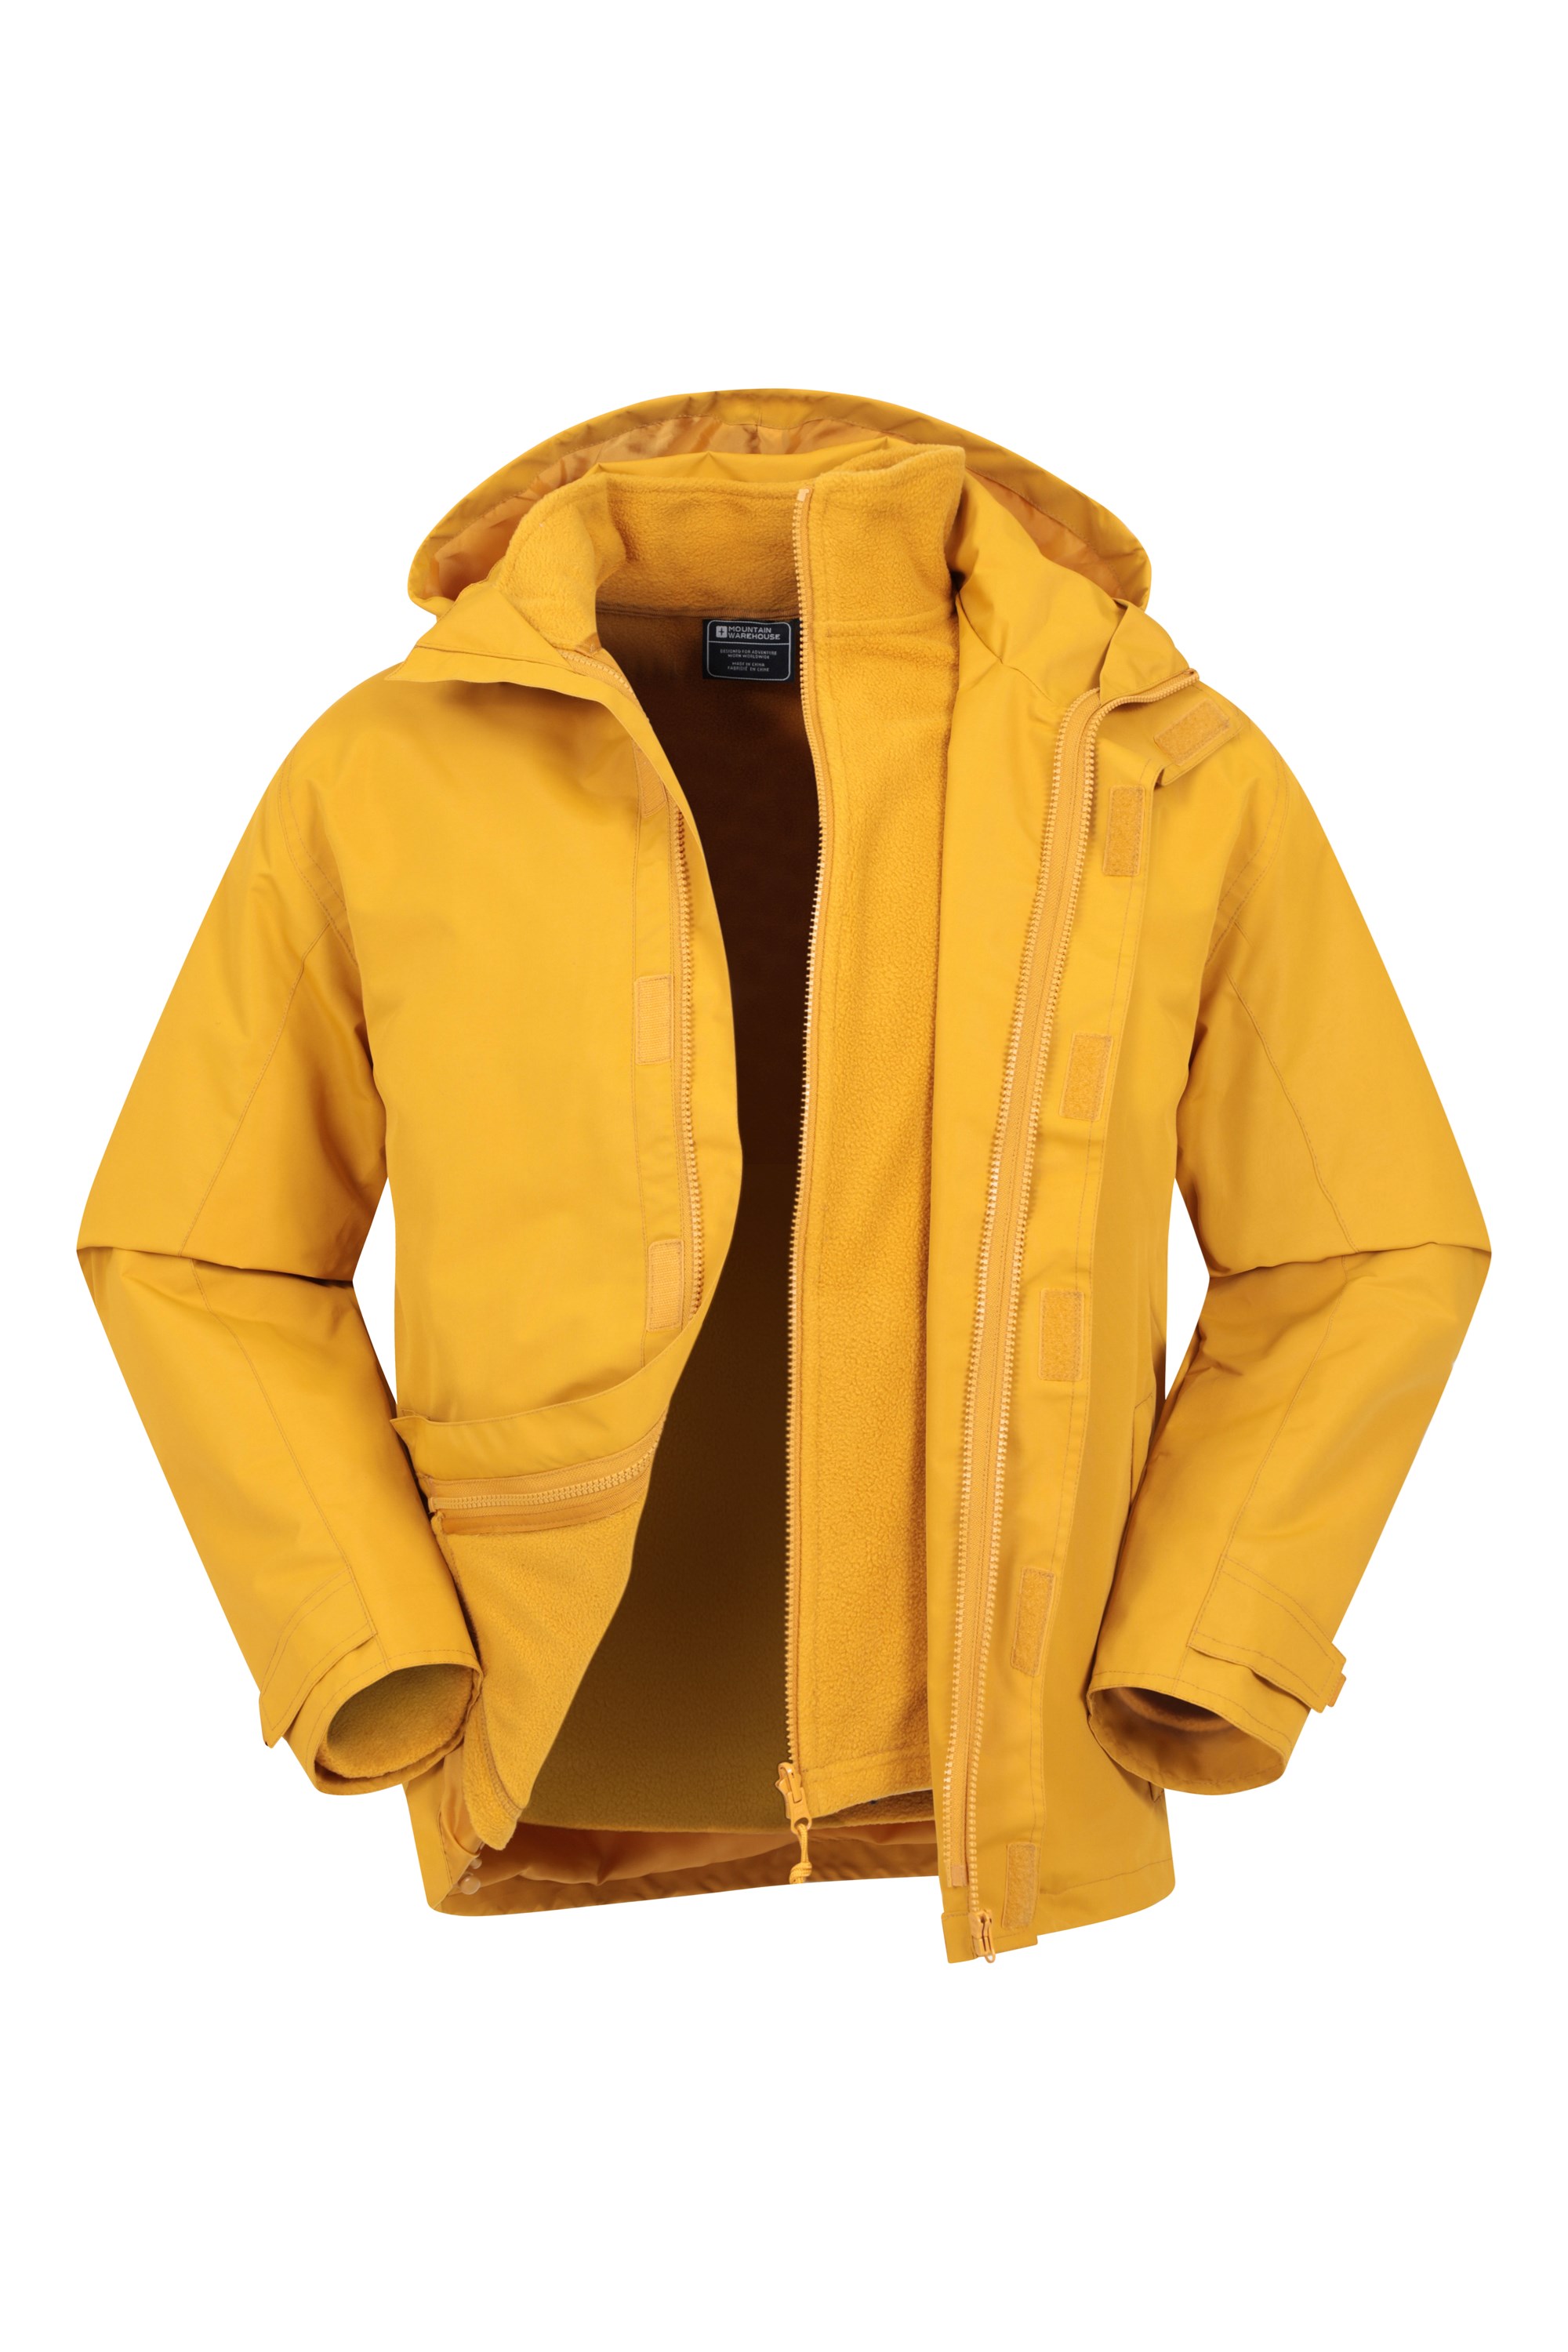 Fell Mens 3 In 1 Water Resistant Jacket - Yellow